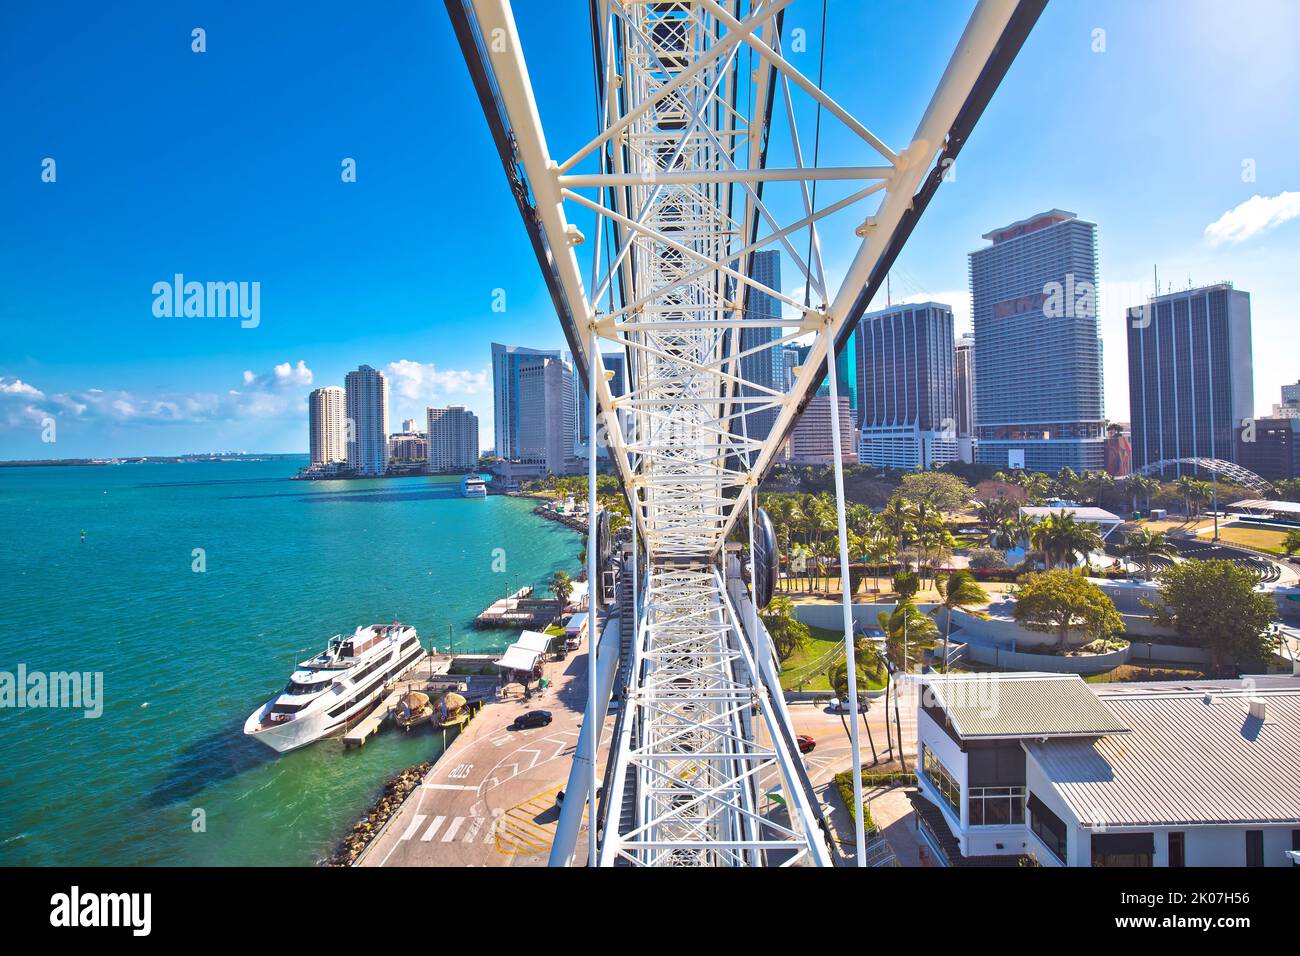 Miami downtown skyline and waterfront view from Observation wheel, Florida state, United States of America Stock Photo